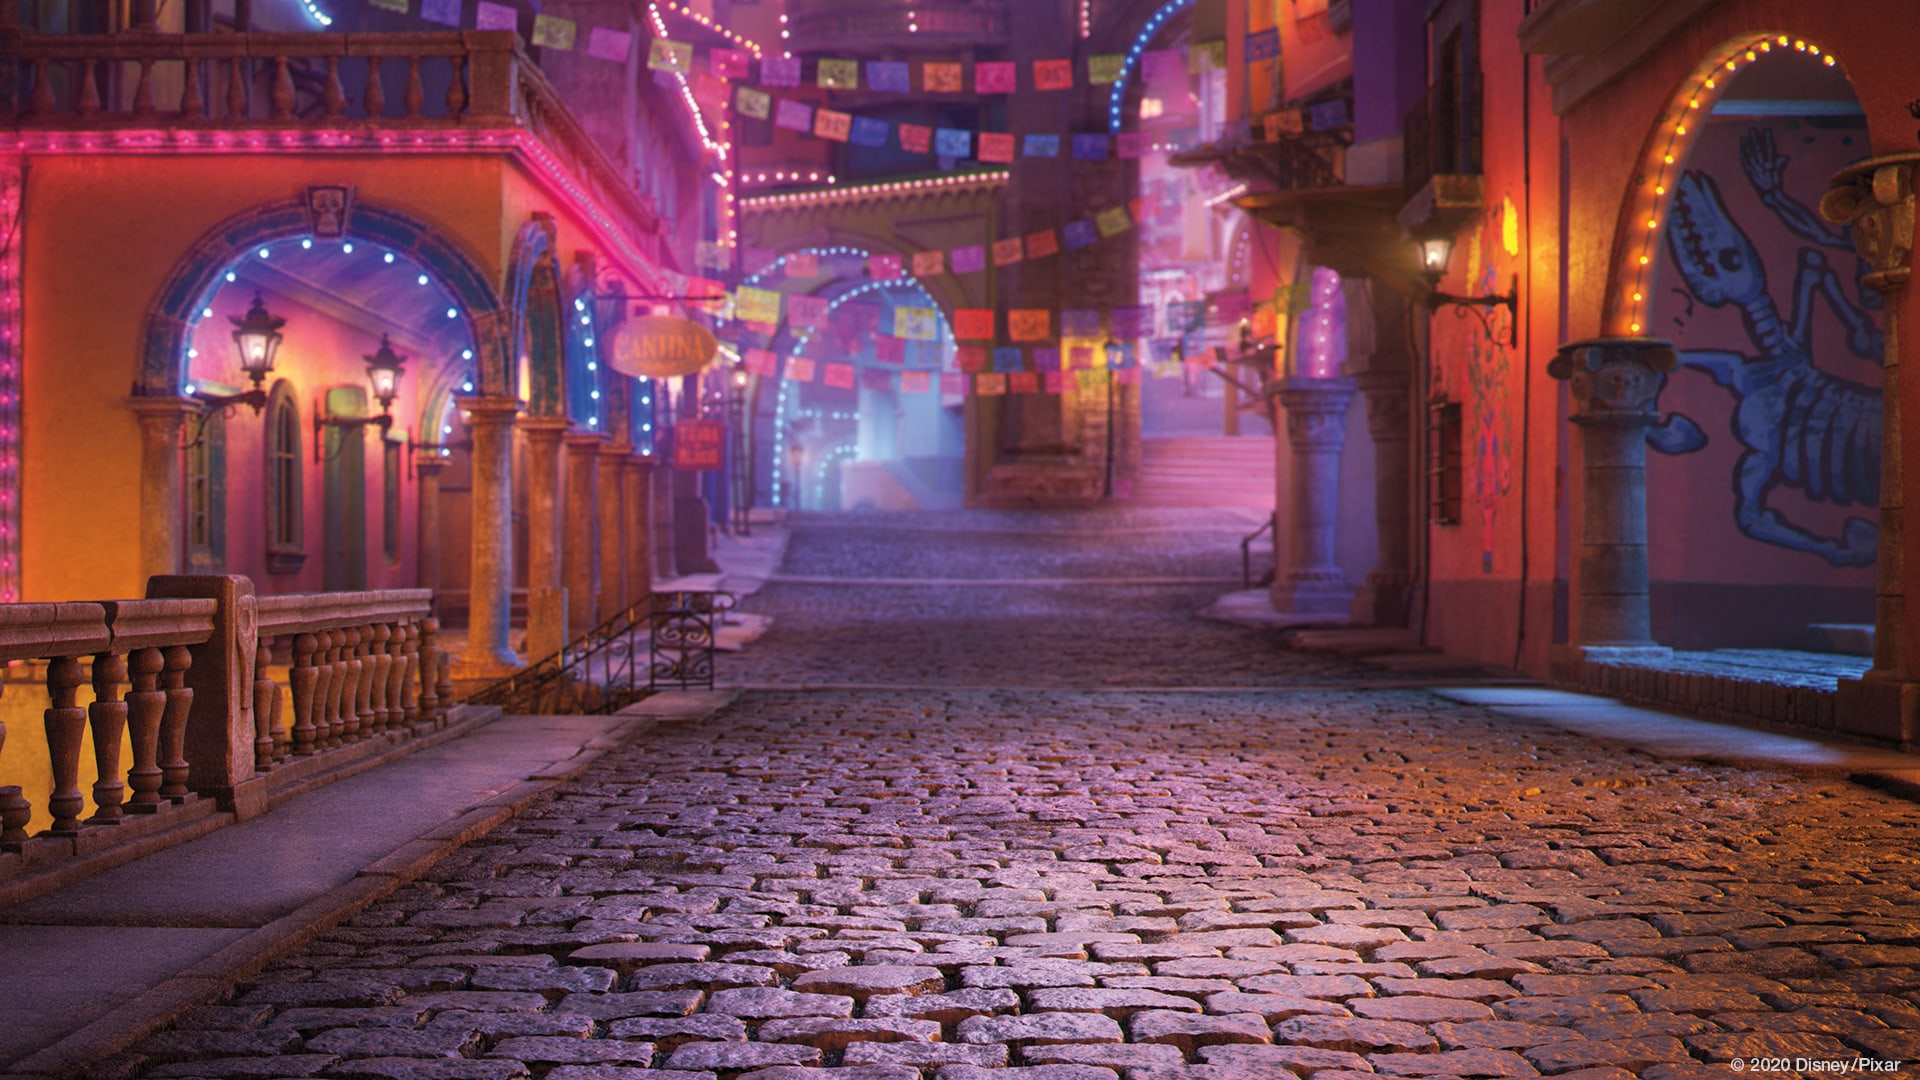 Coco - Streets at nightime from the Disney Pixar movie Coco